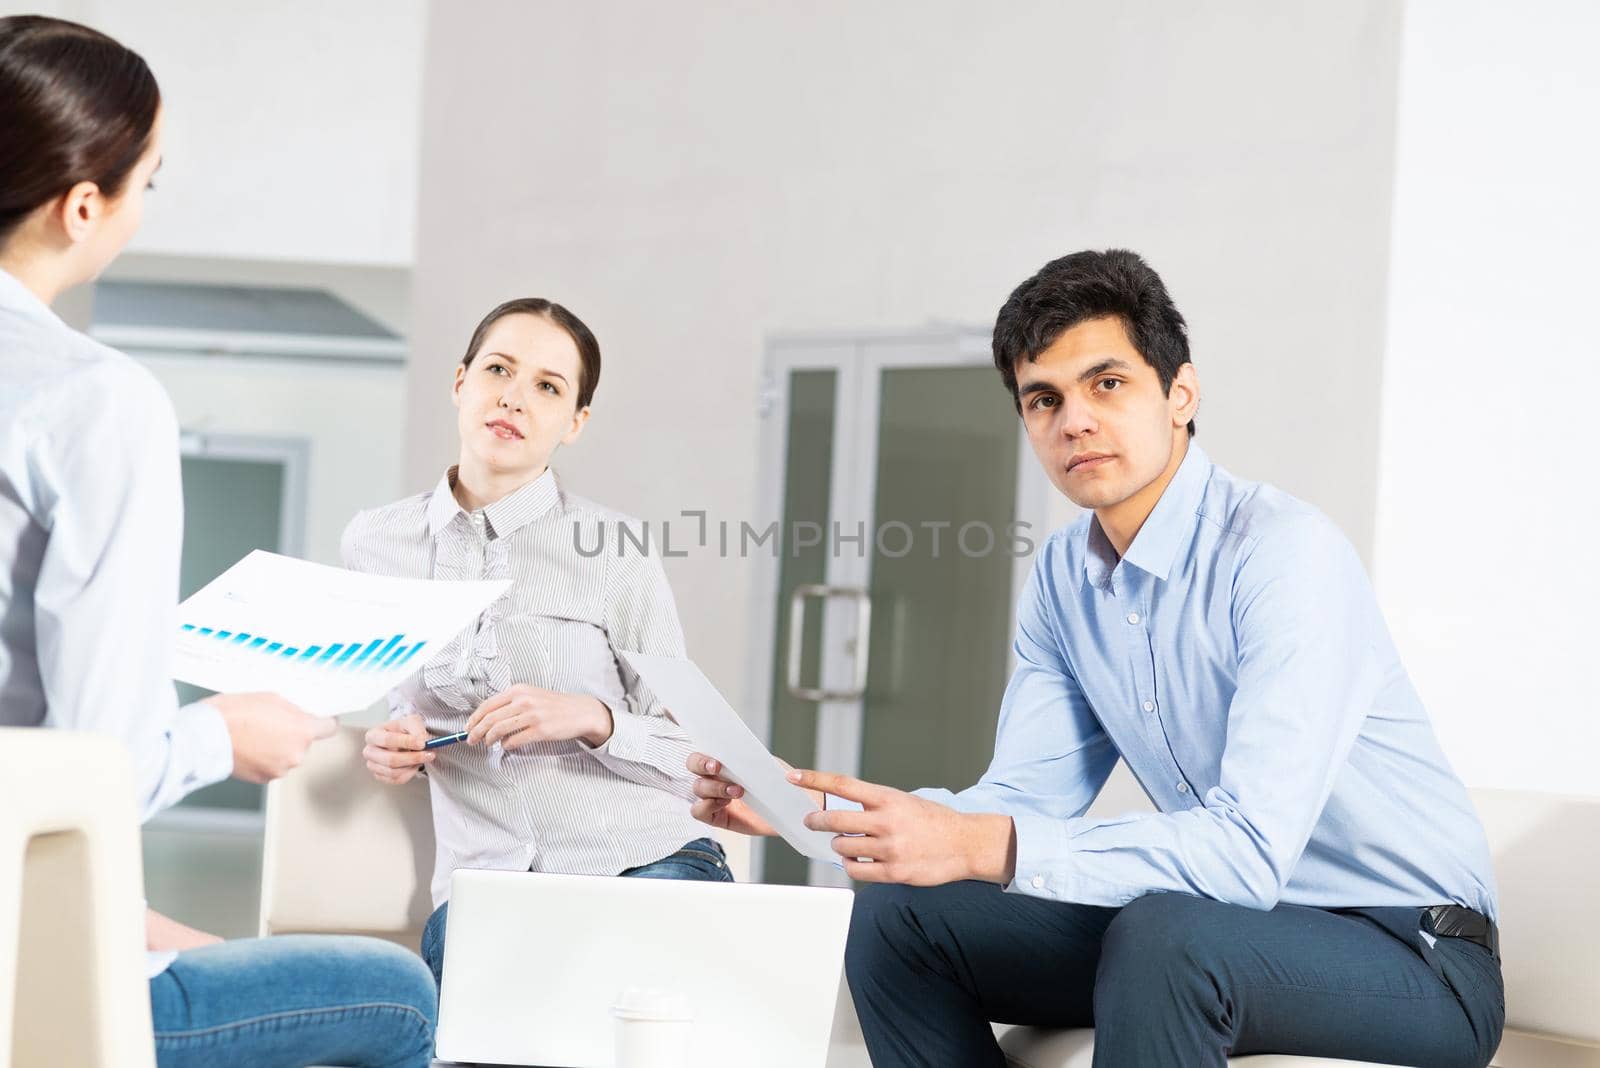 portrait of a young man at a business meeting. concept of team work